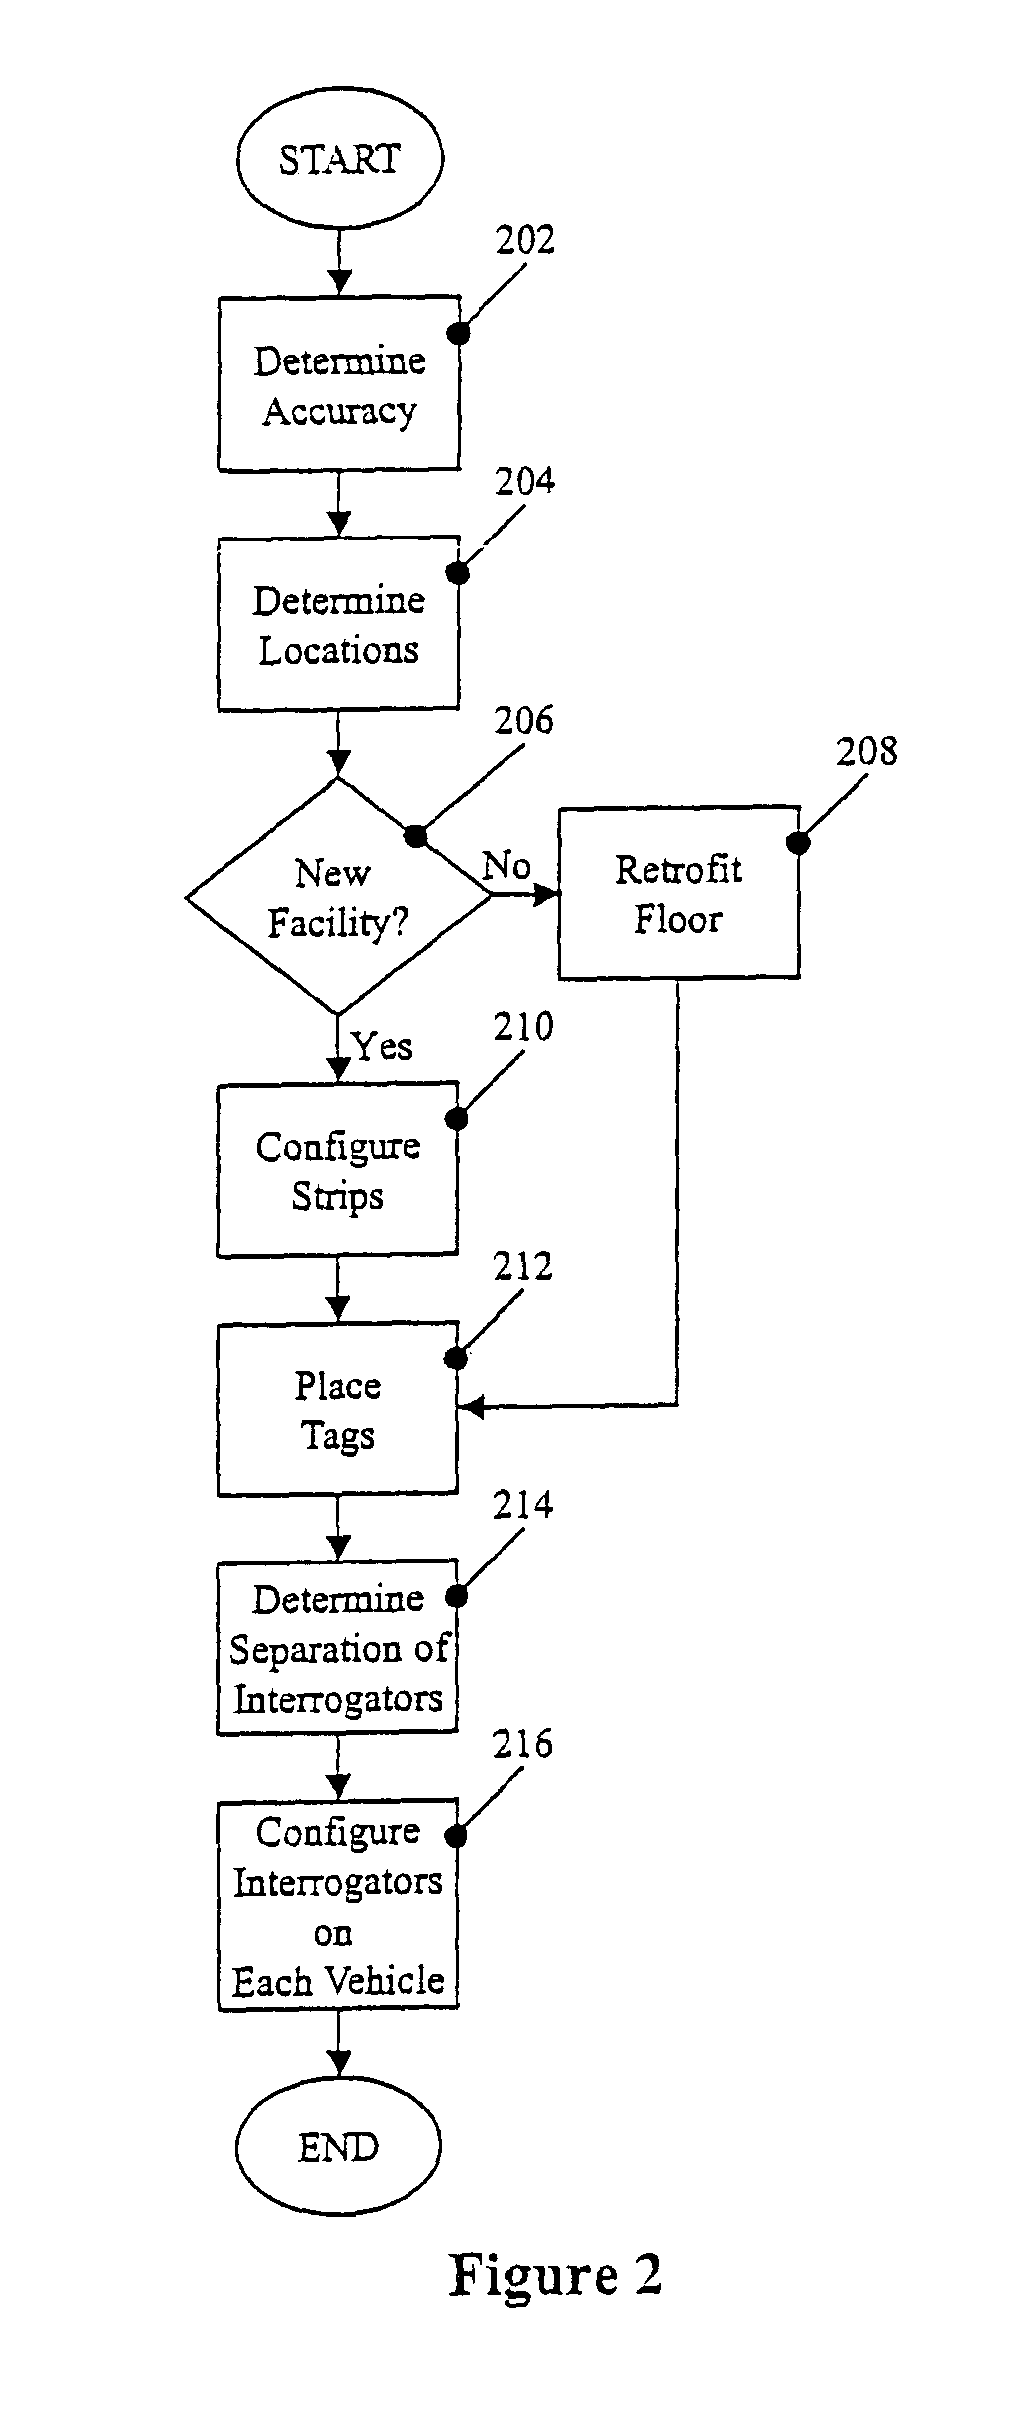 Systems and methods for tracking the location of items within a controlled area